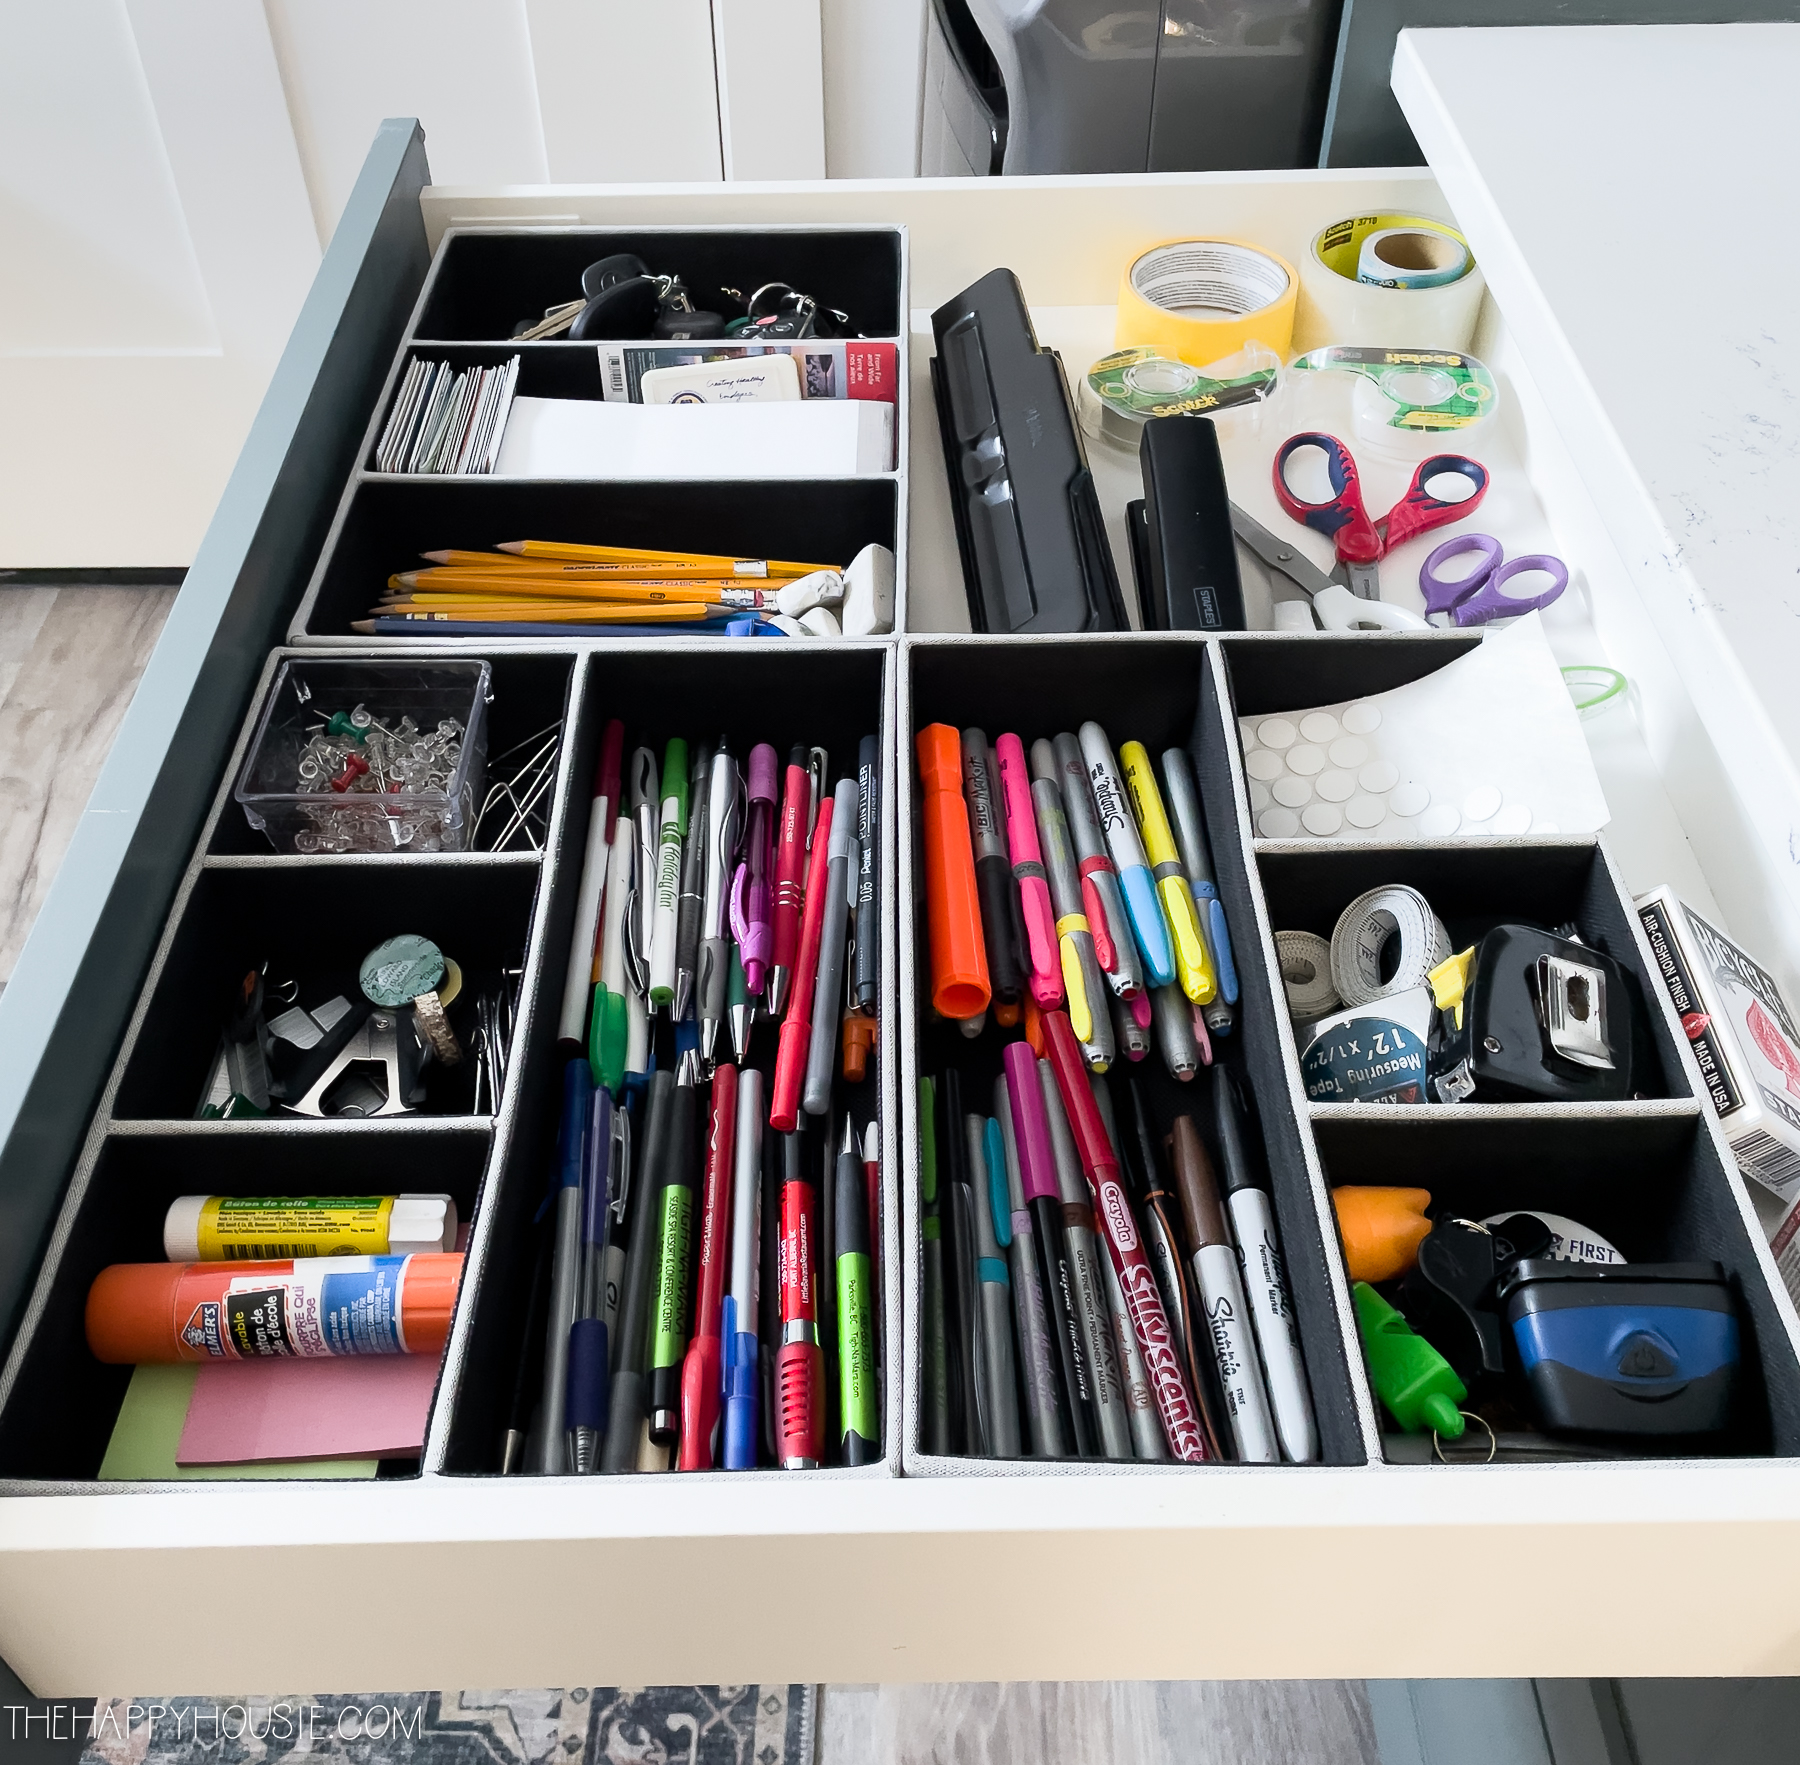 a junk drawer organized with drawer organizers to house home office supplies